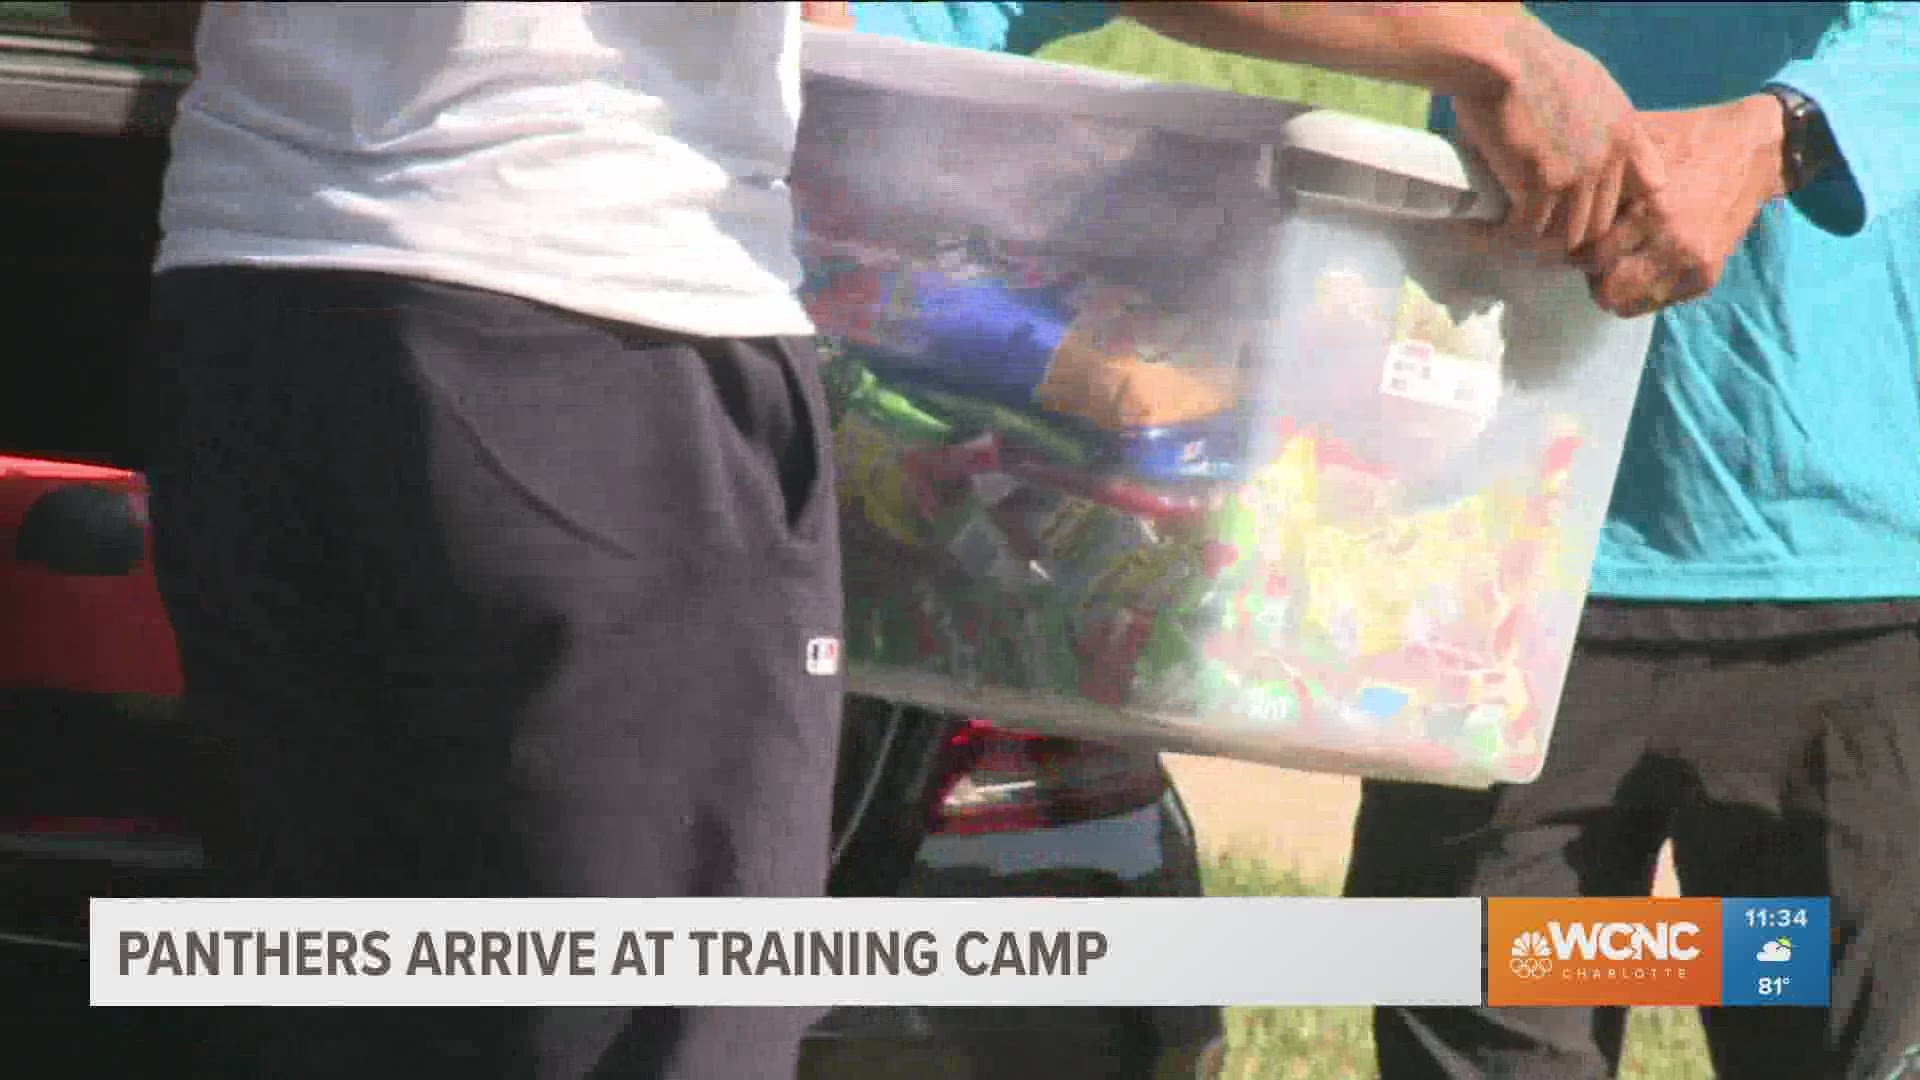 Carolina Panther wide receiver DJ Moore showed up at training camp Tuesday carrying a huge bin of candy.